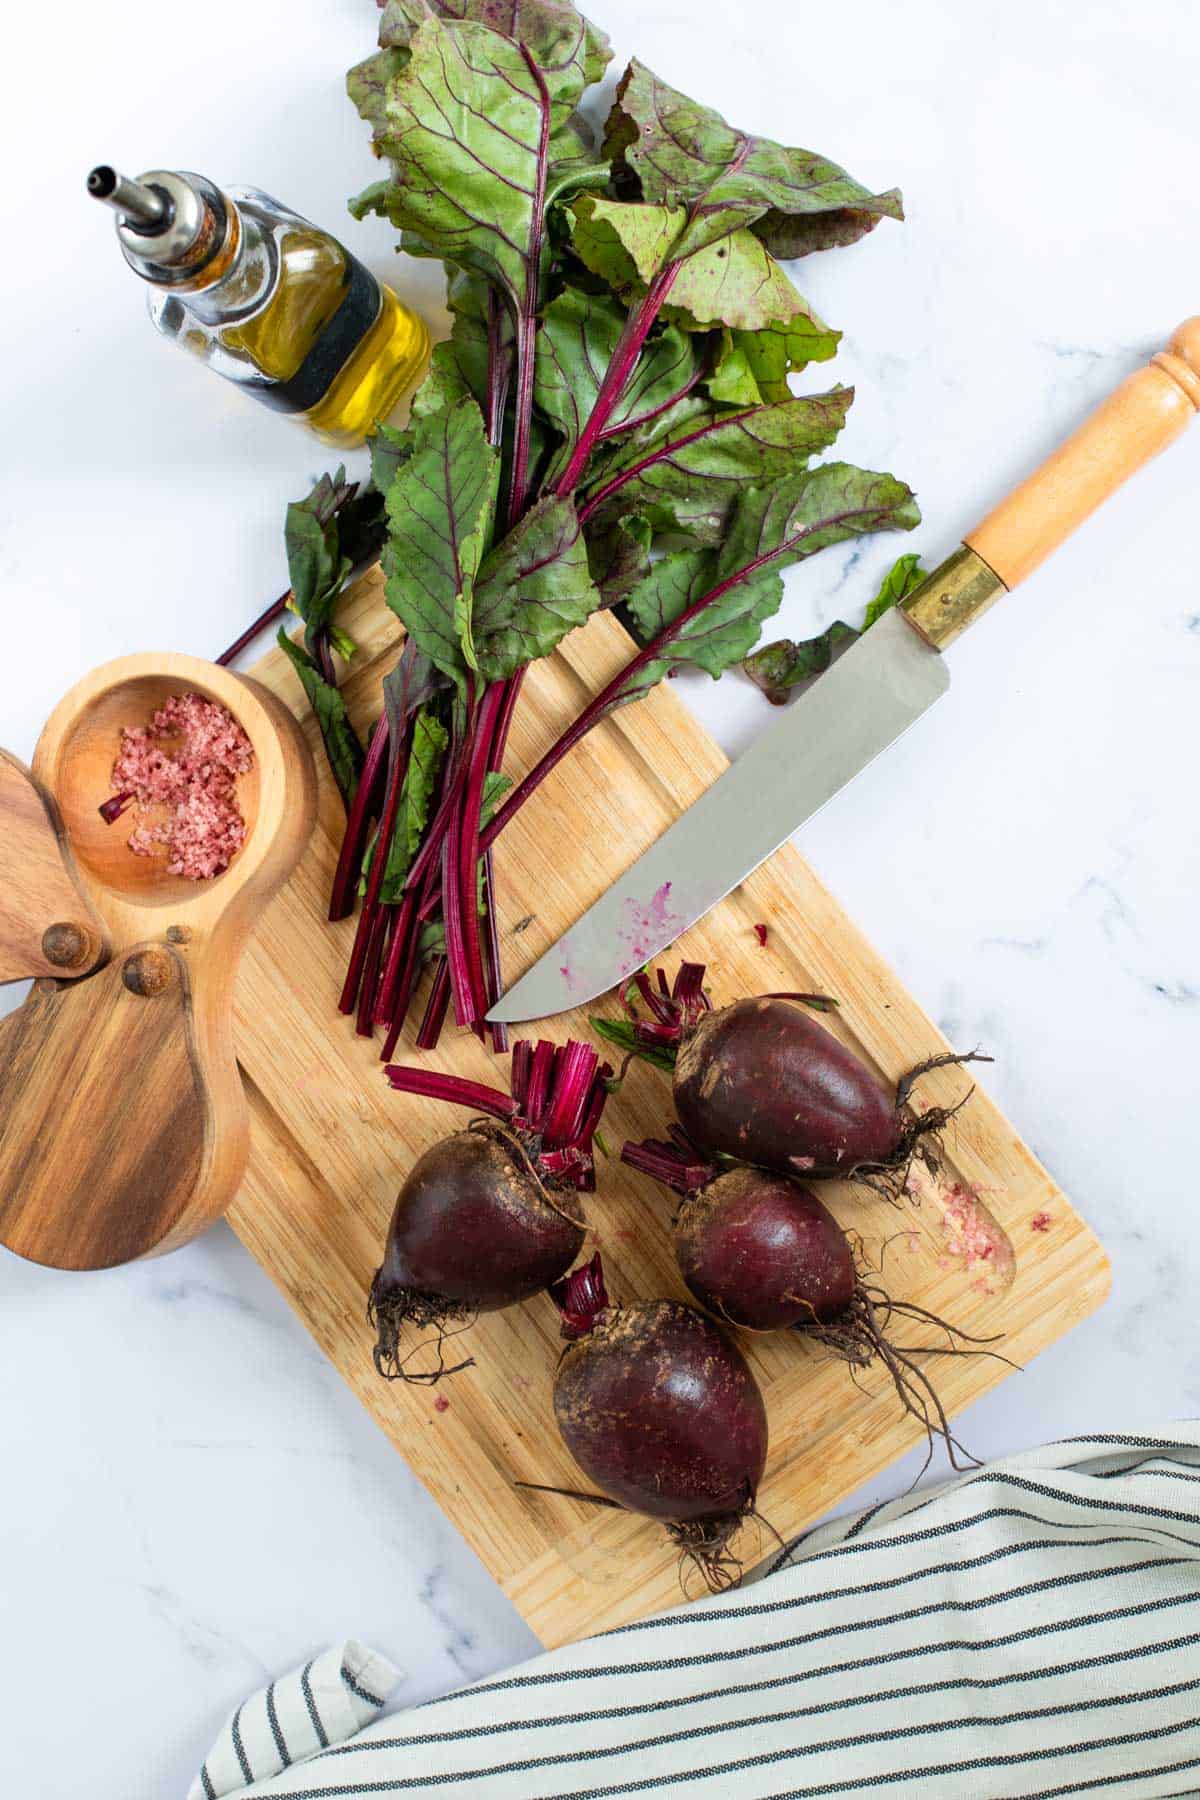 Fresh beetroots with leaves on a cutting board alongside a kitchen knife, olive oil, and salt.